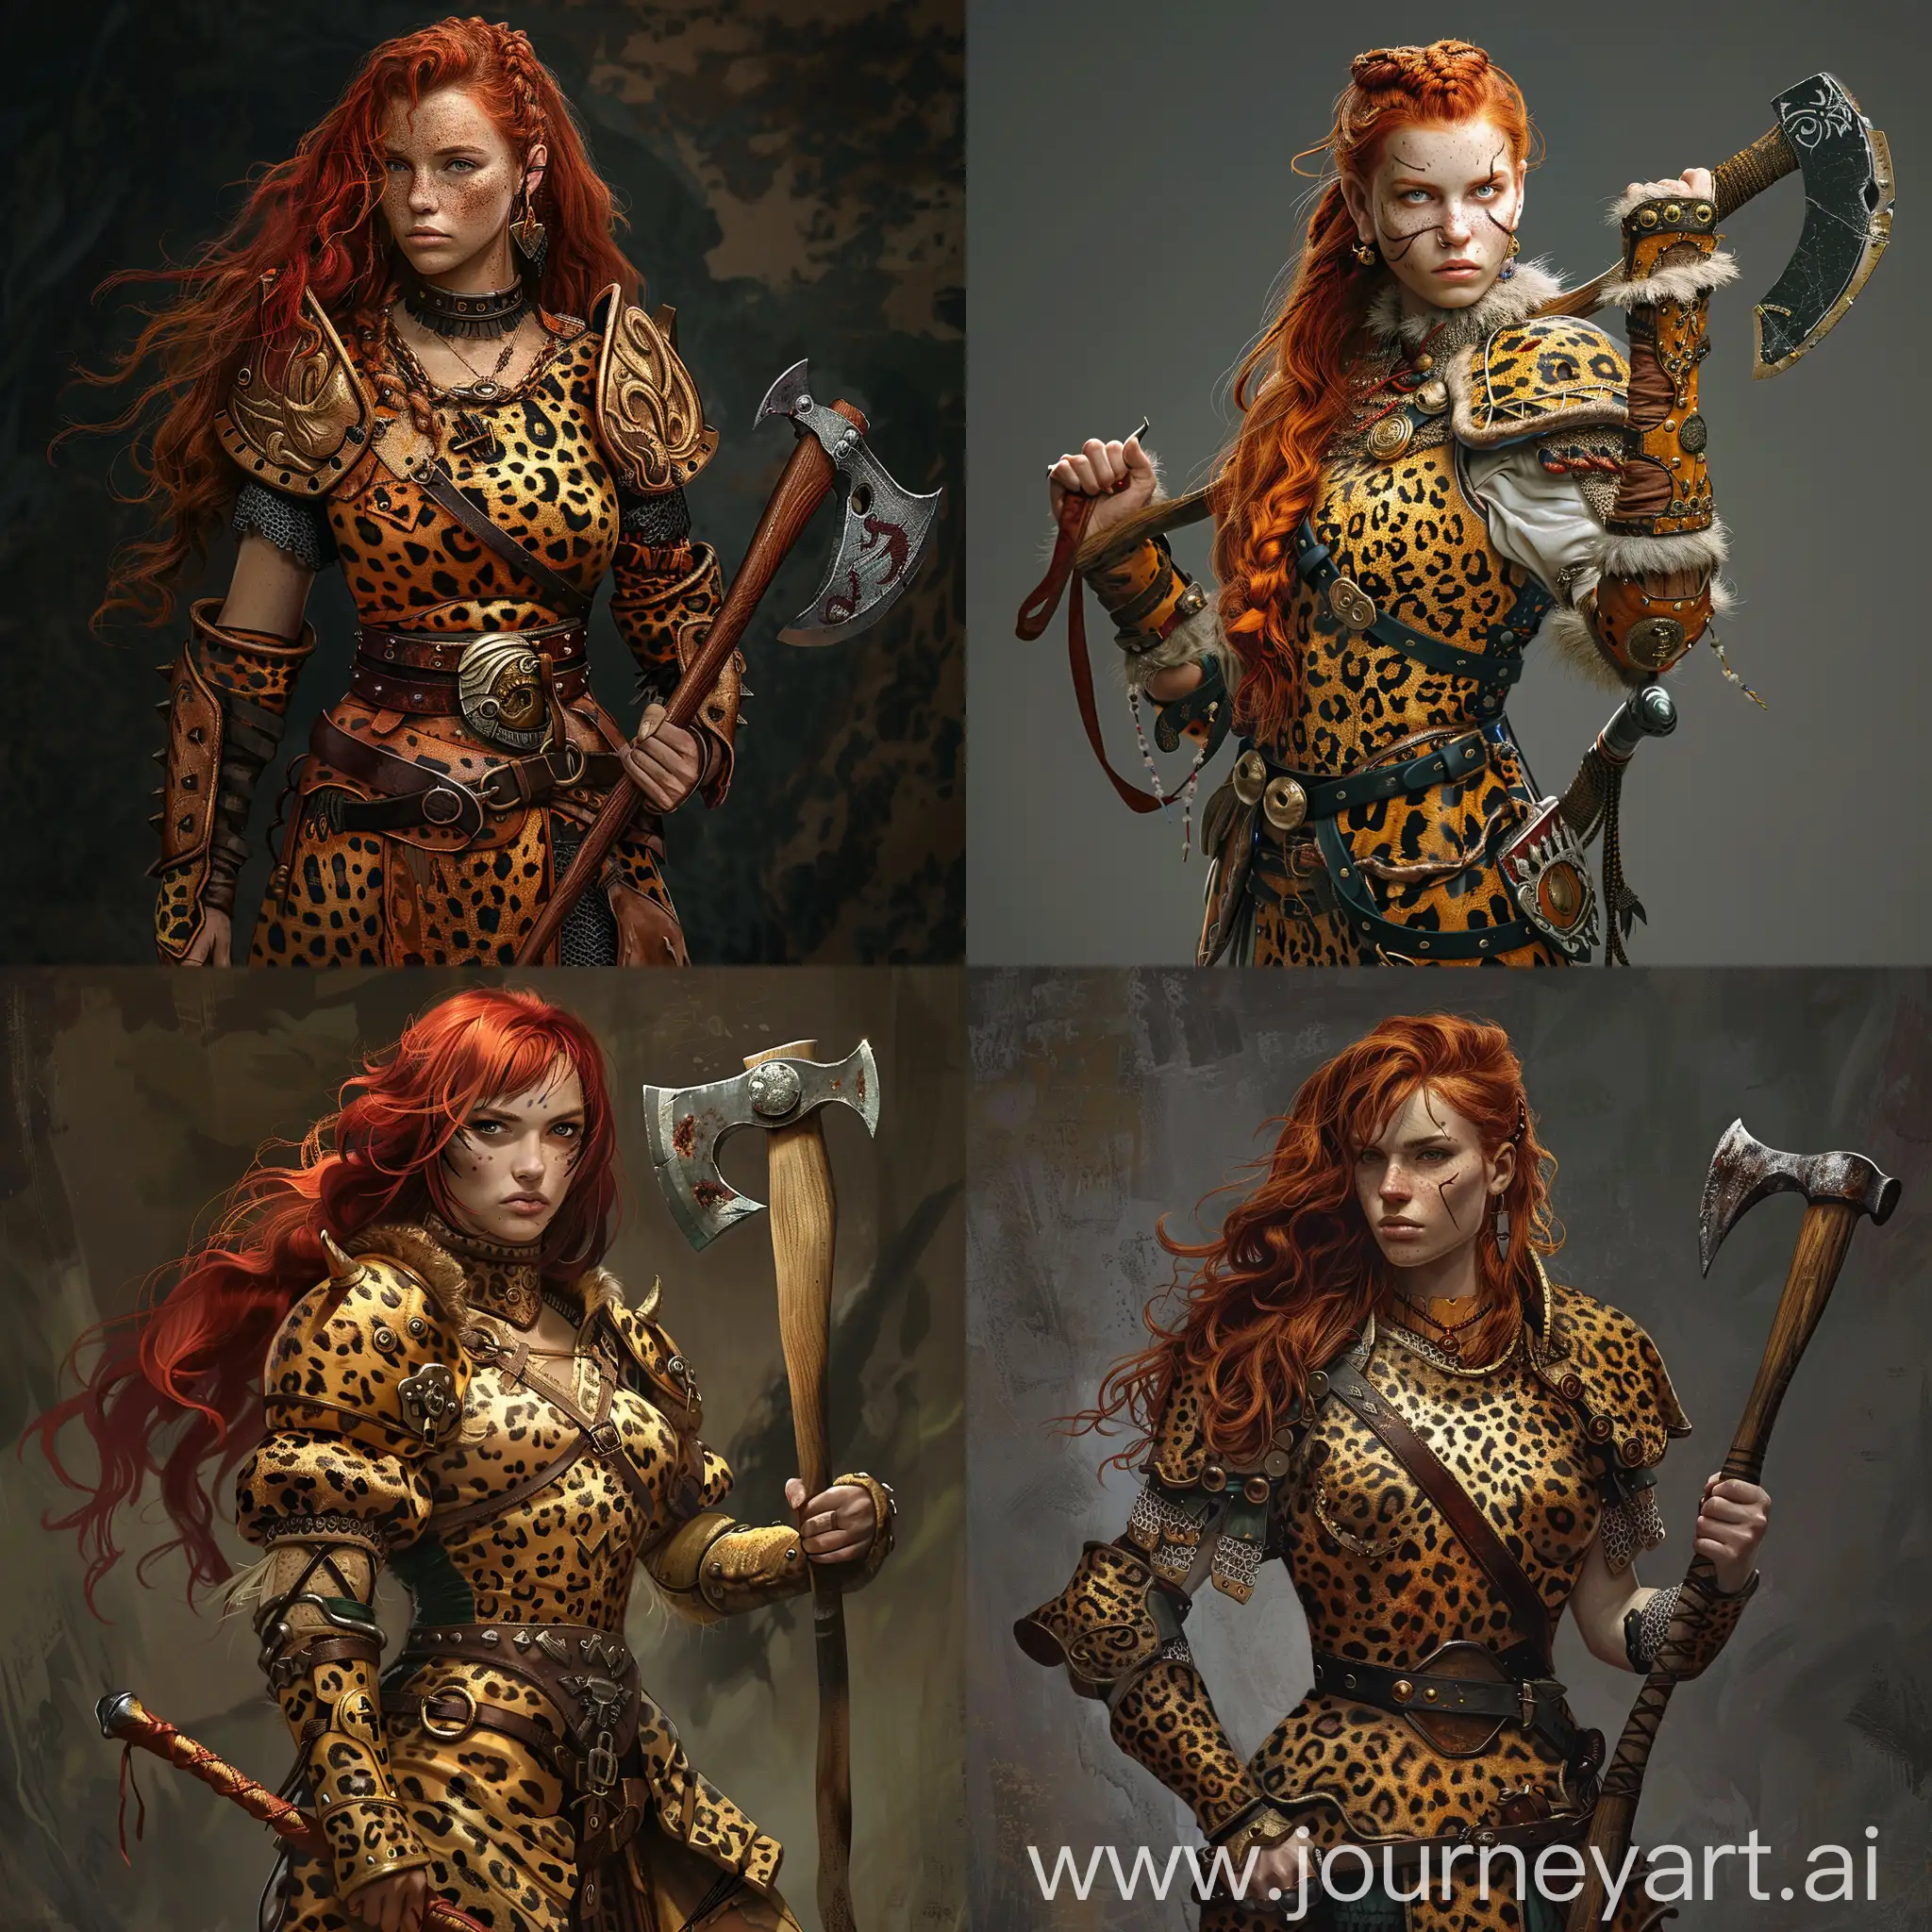 A red-haired woman warrior in sturdy leopard armor, holding a axe in her right hand, realism 
